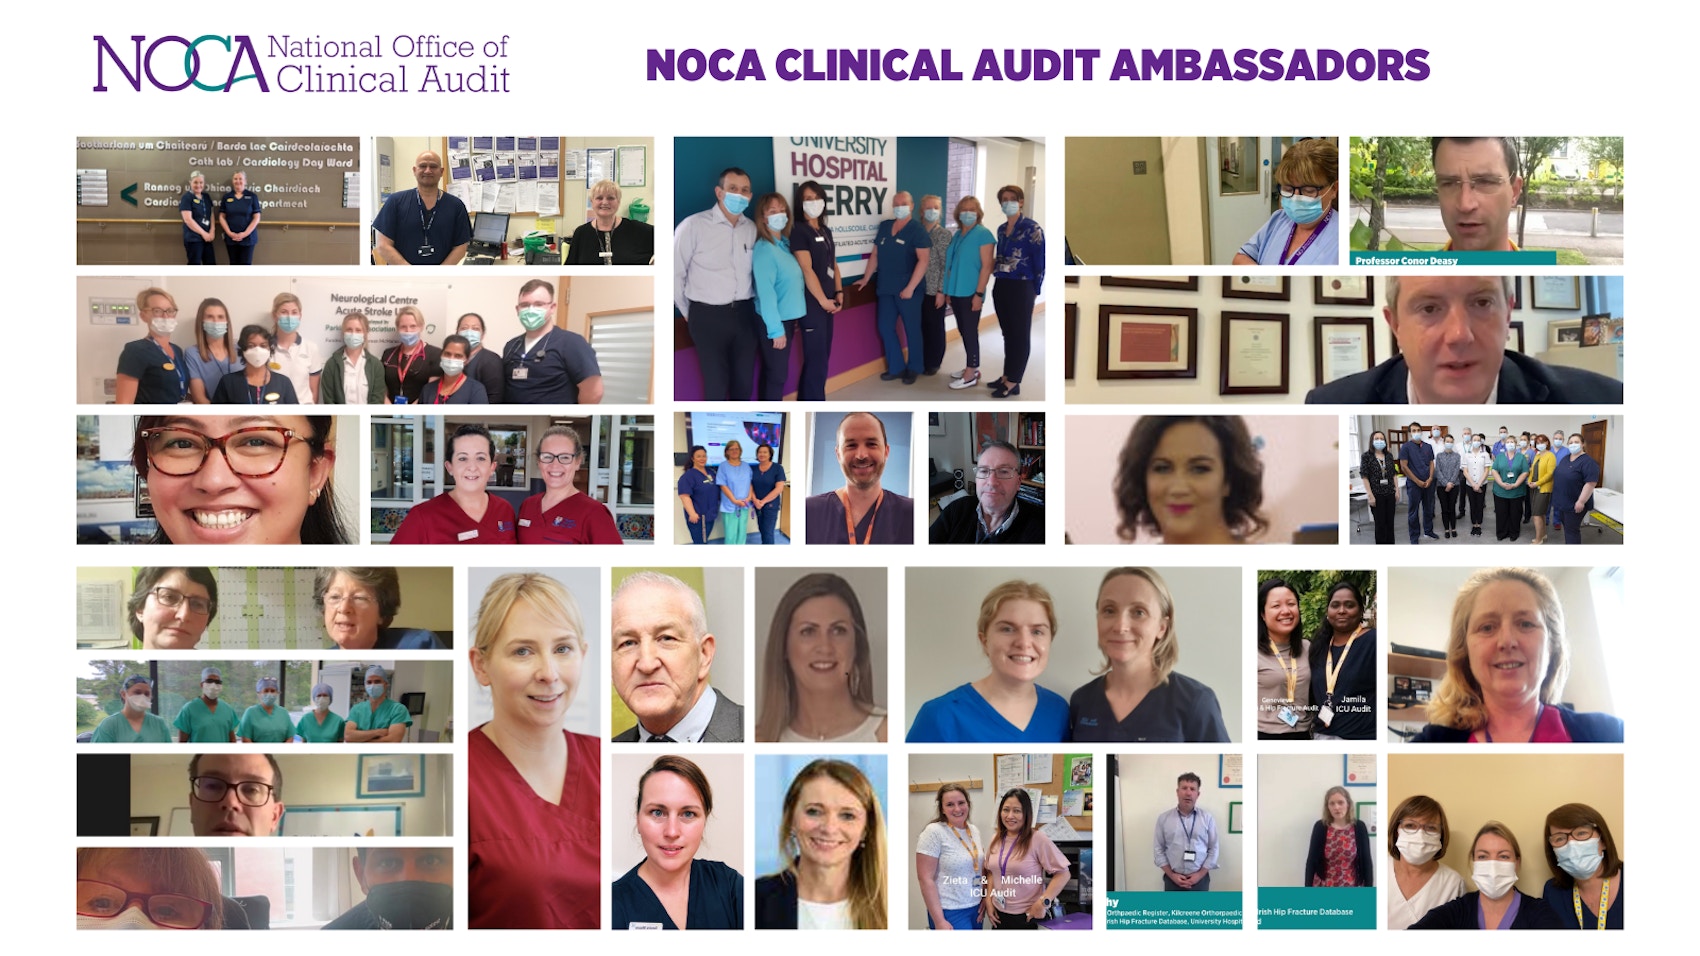 Great engagement with NOCA Clinical Audit Ambassadors campaign